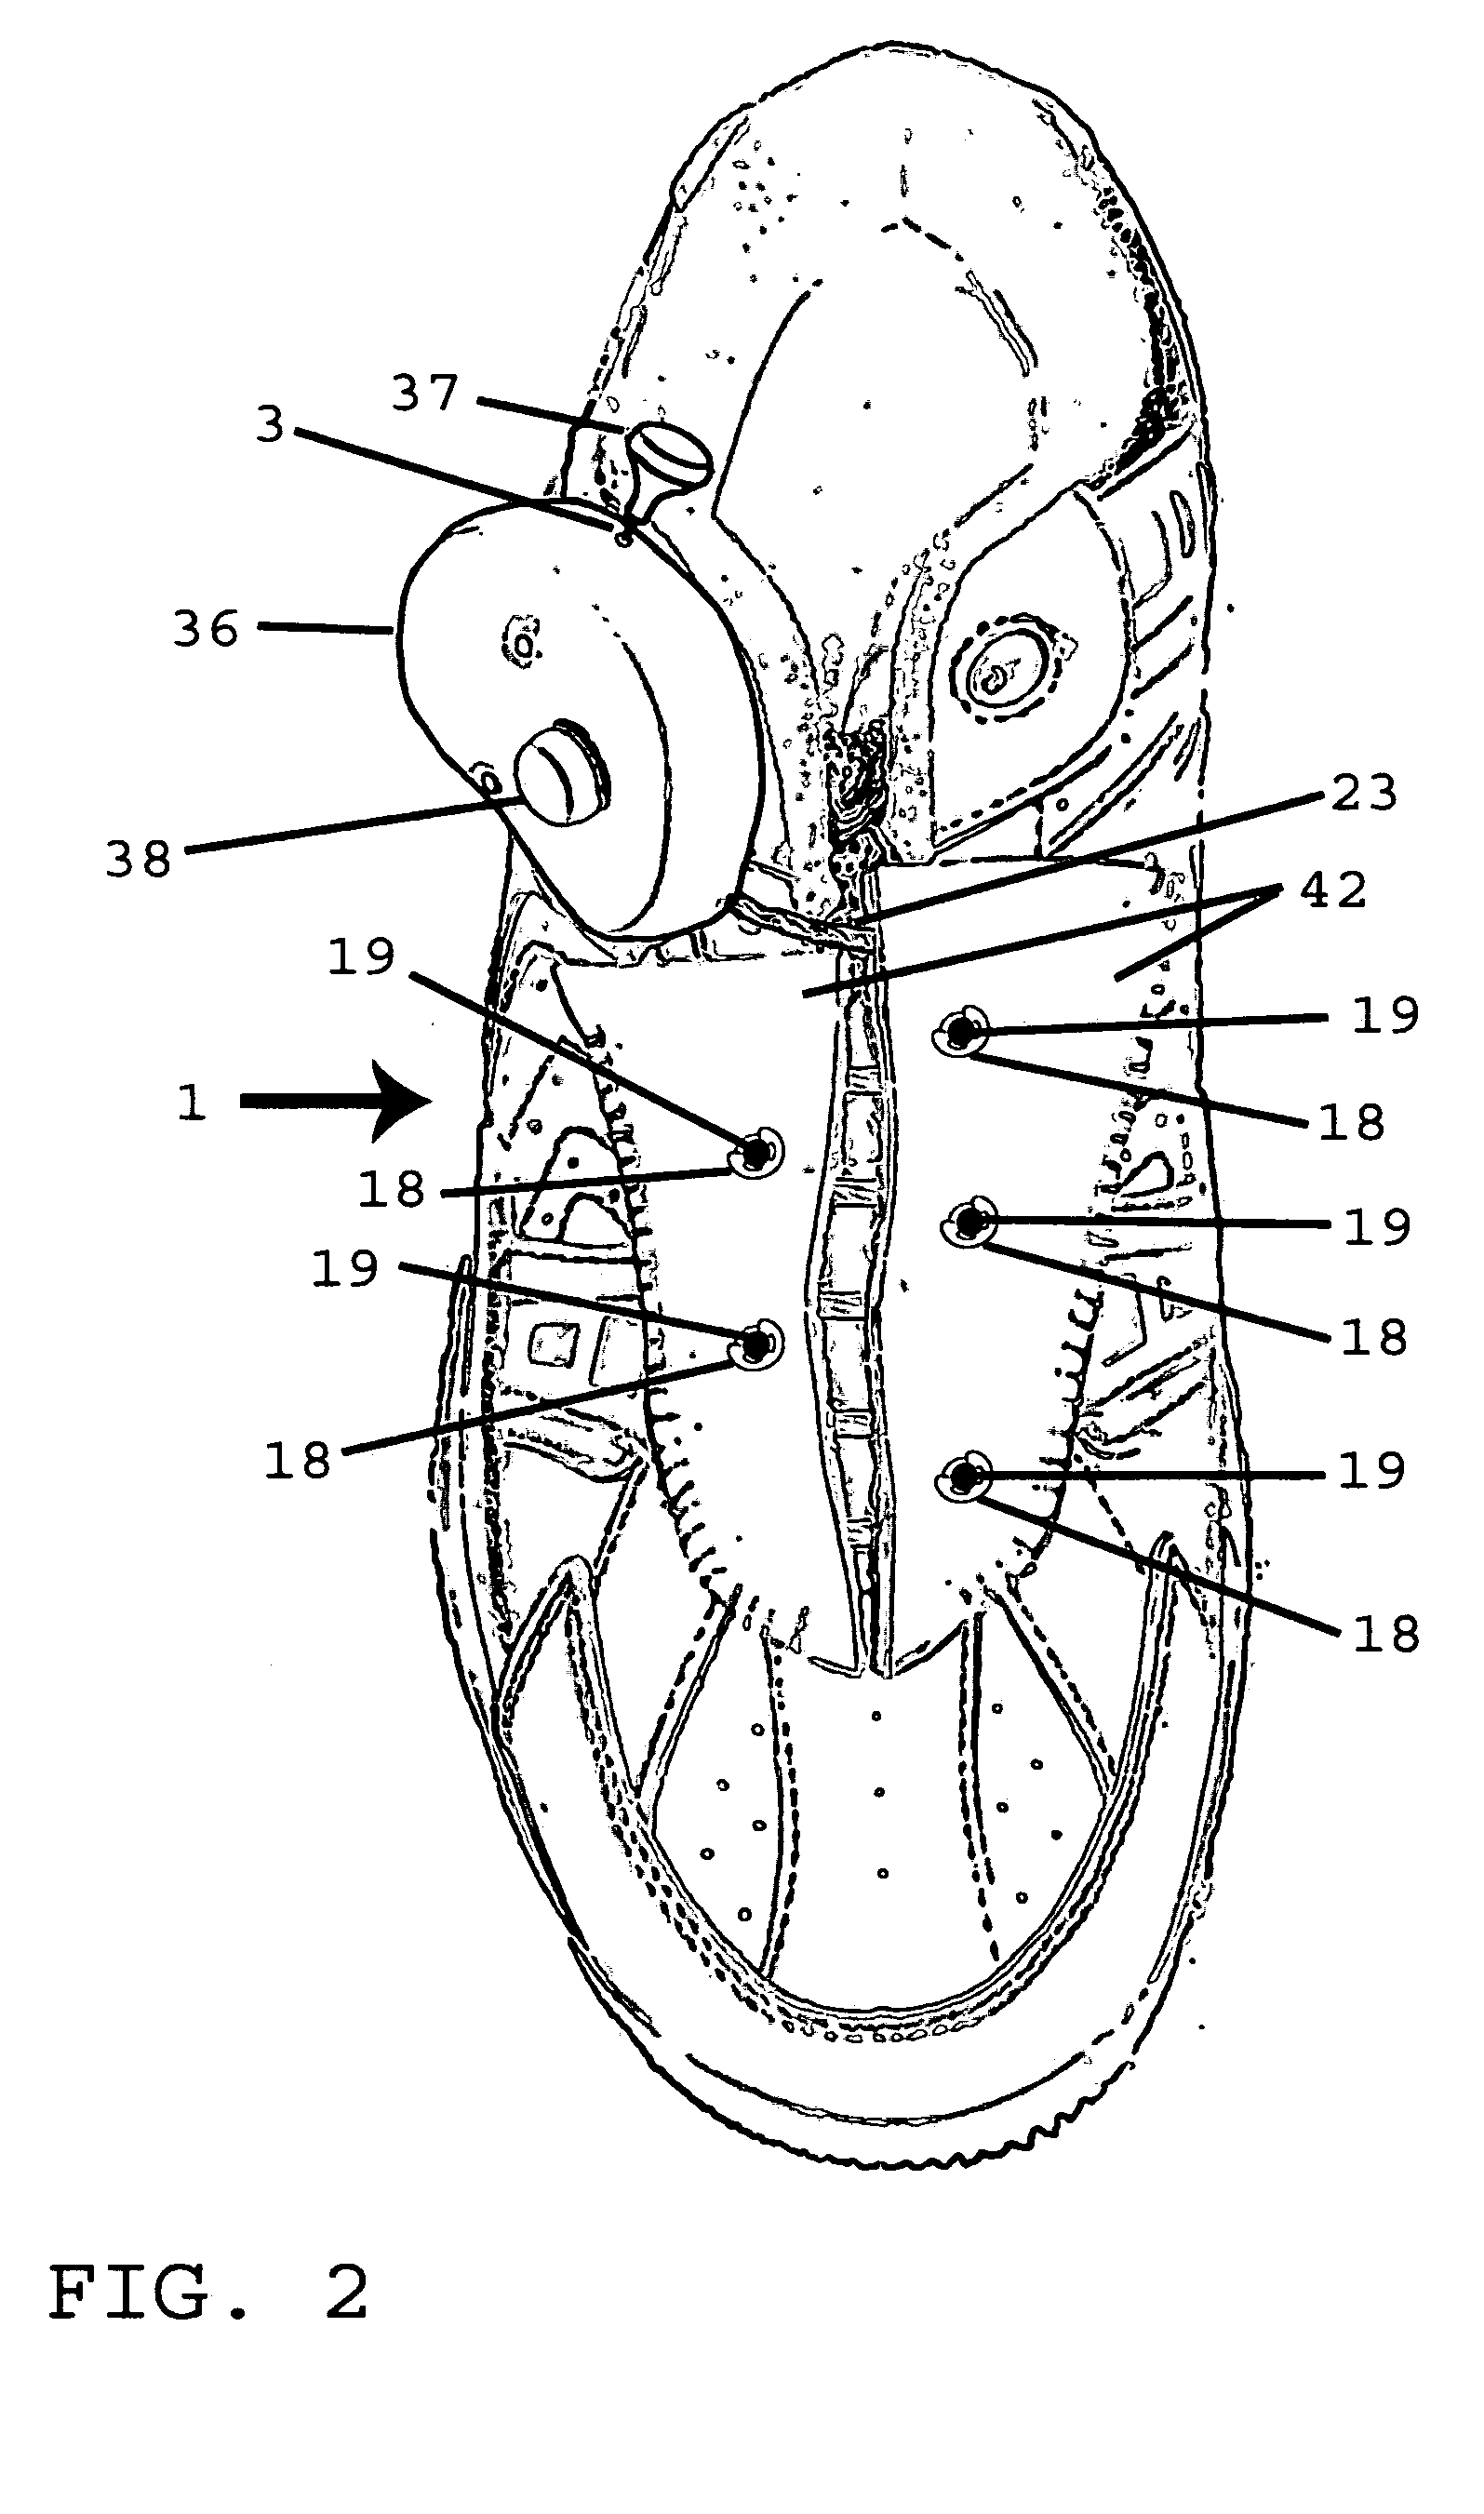 Pull-cord and pulley lacing system